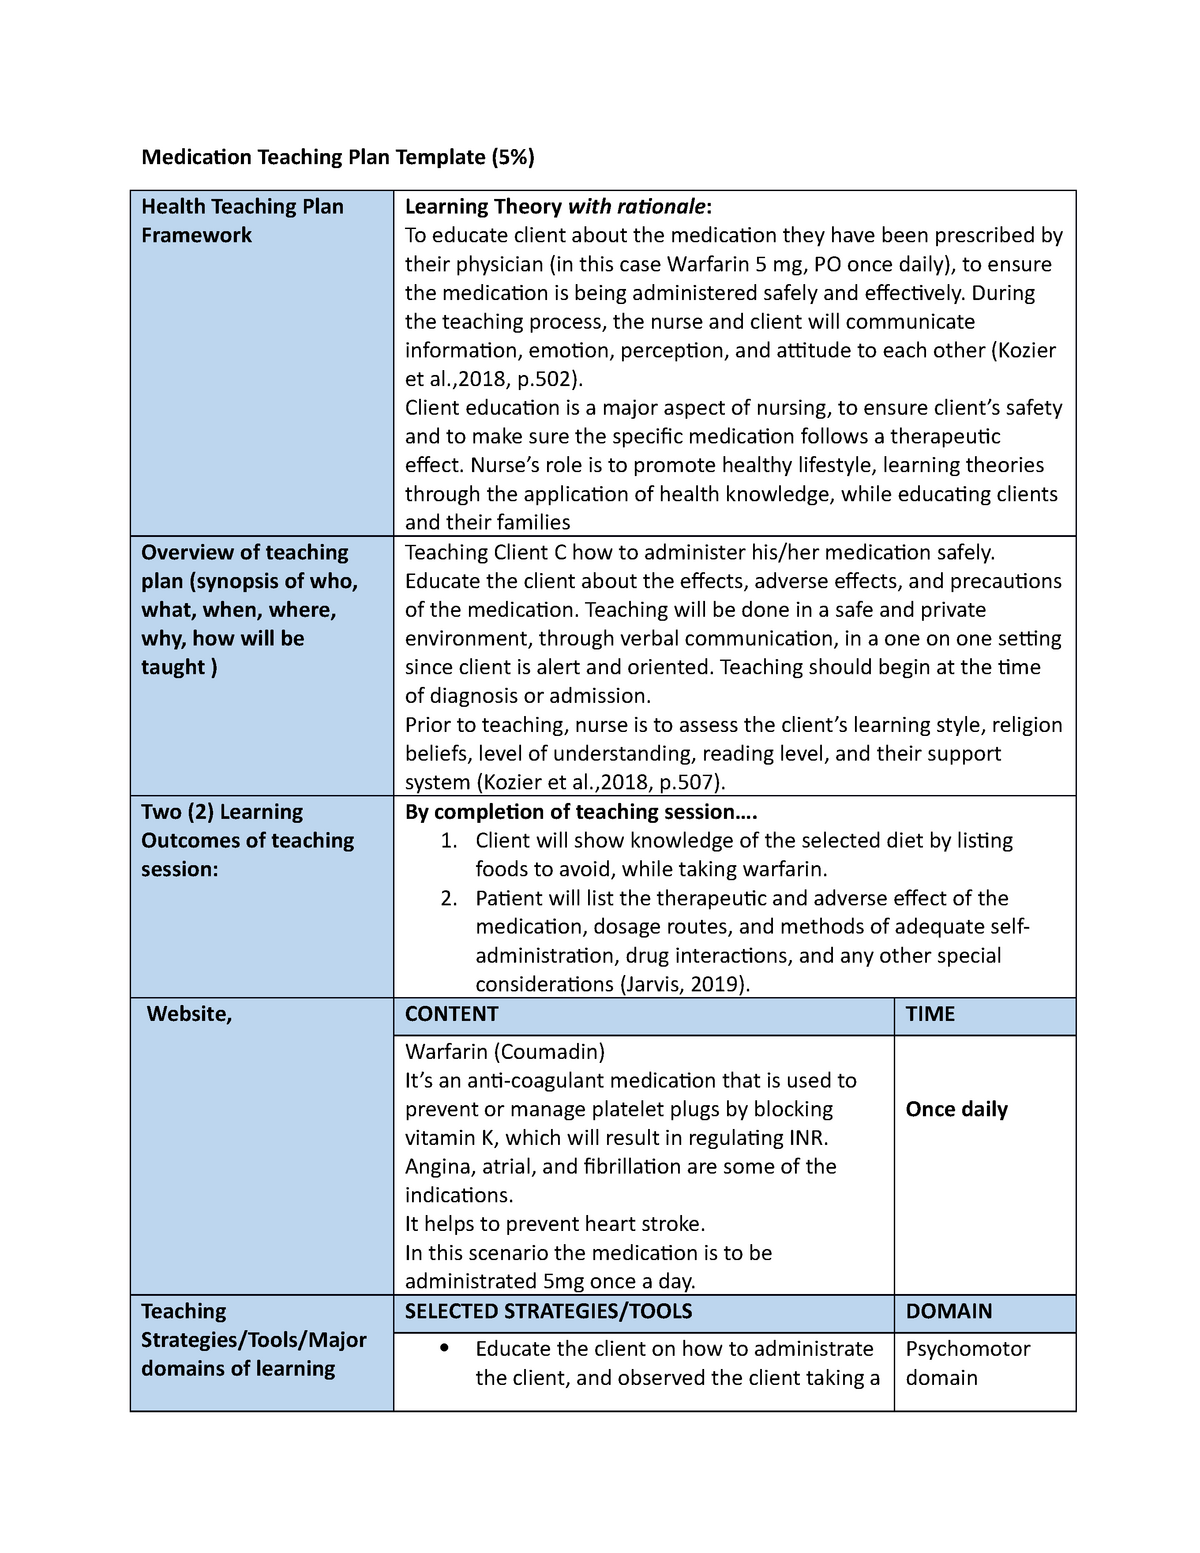 Medication Teaching Plan Template Complete Medication Teaching Plan